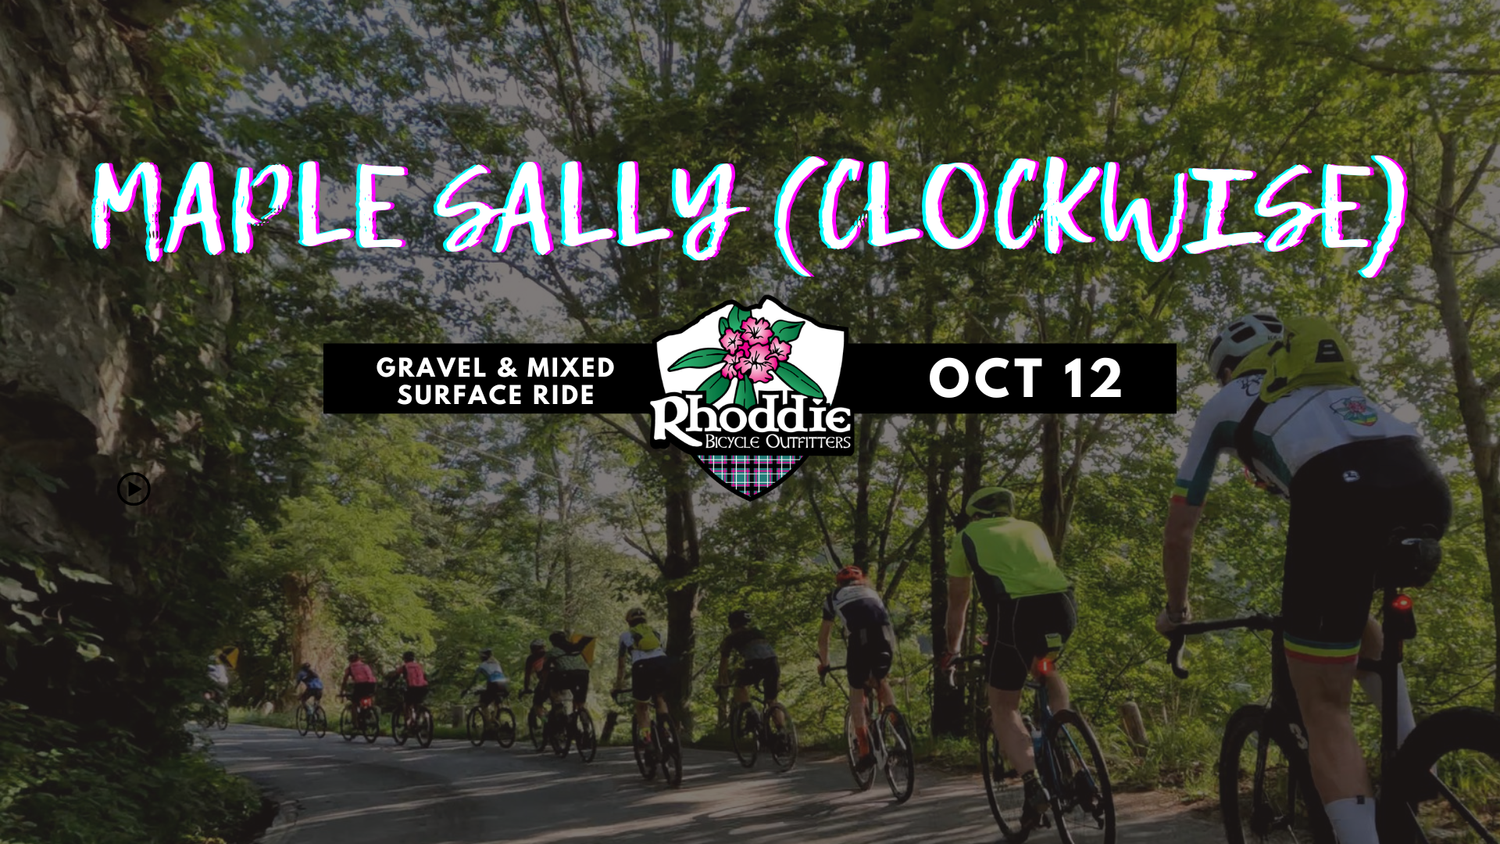 Maple Sally Clockwise Ride with Rhoddie Bicycle Outfitters